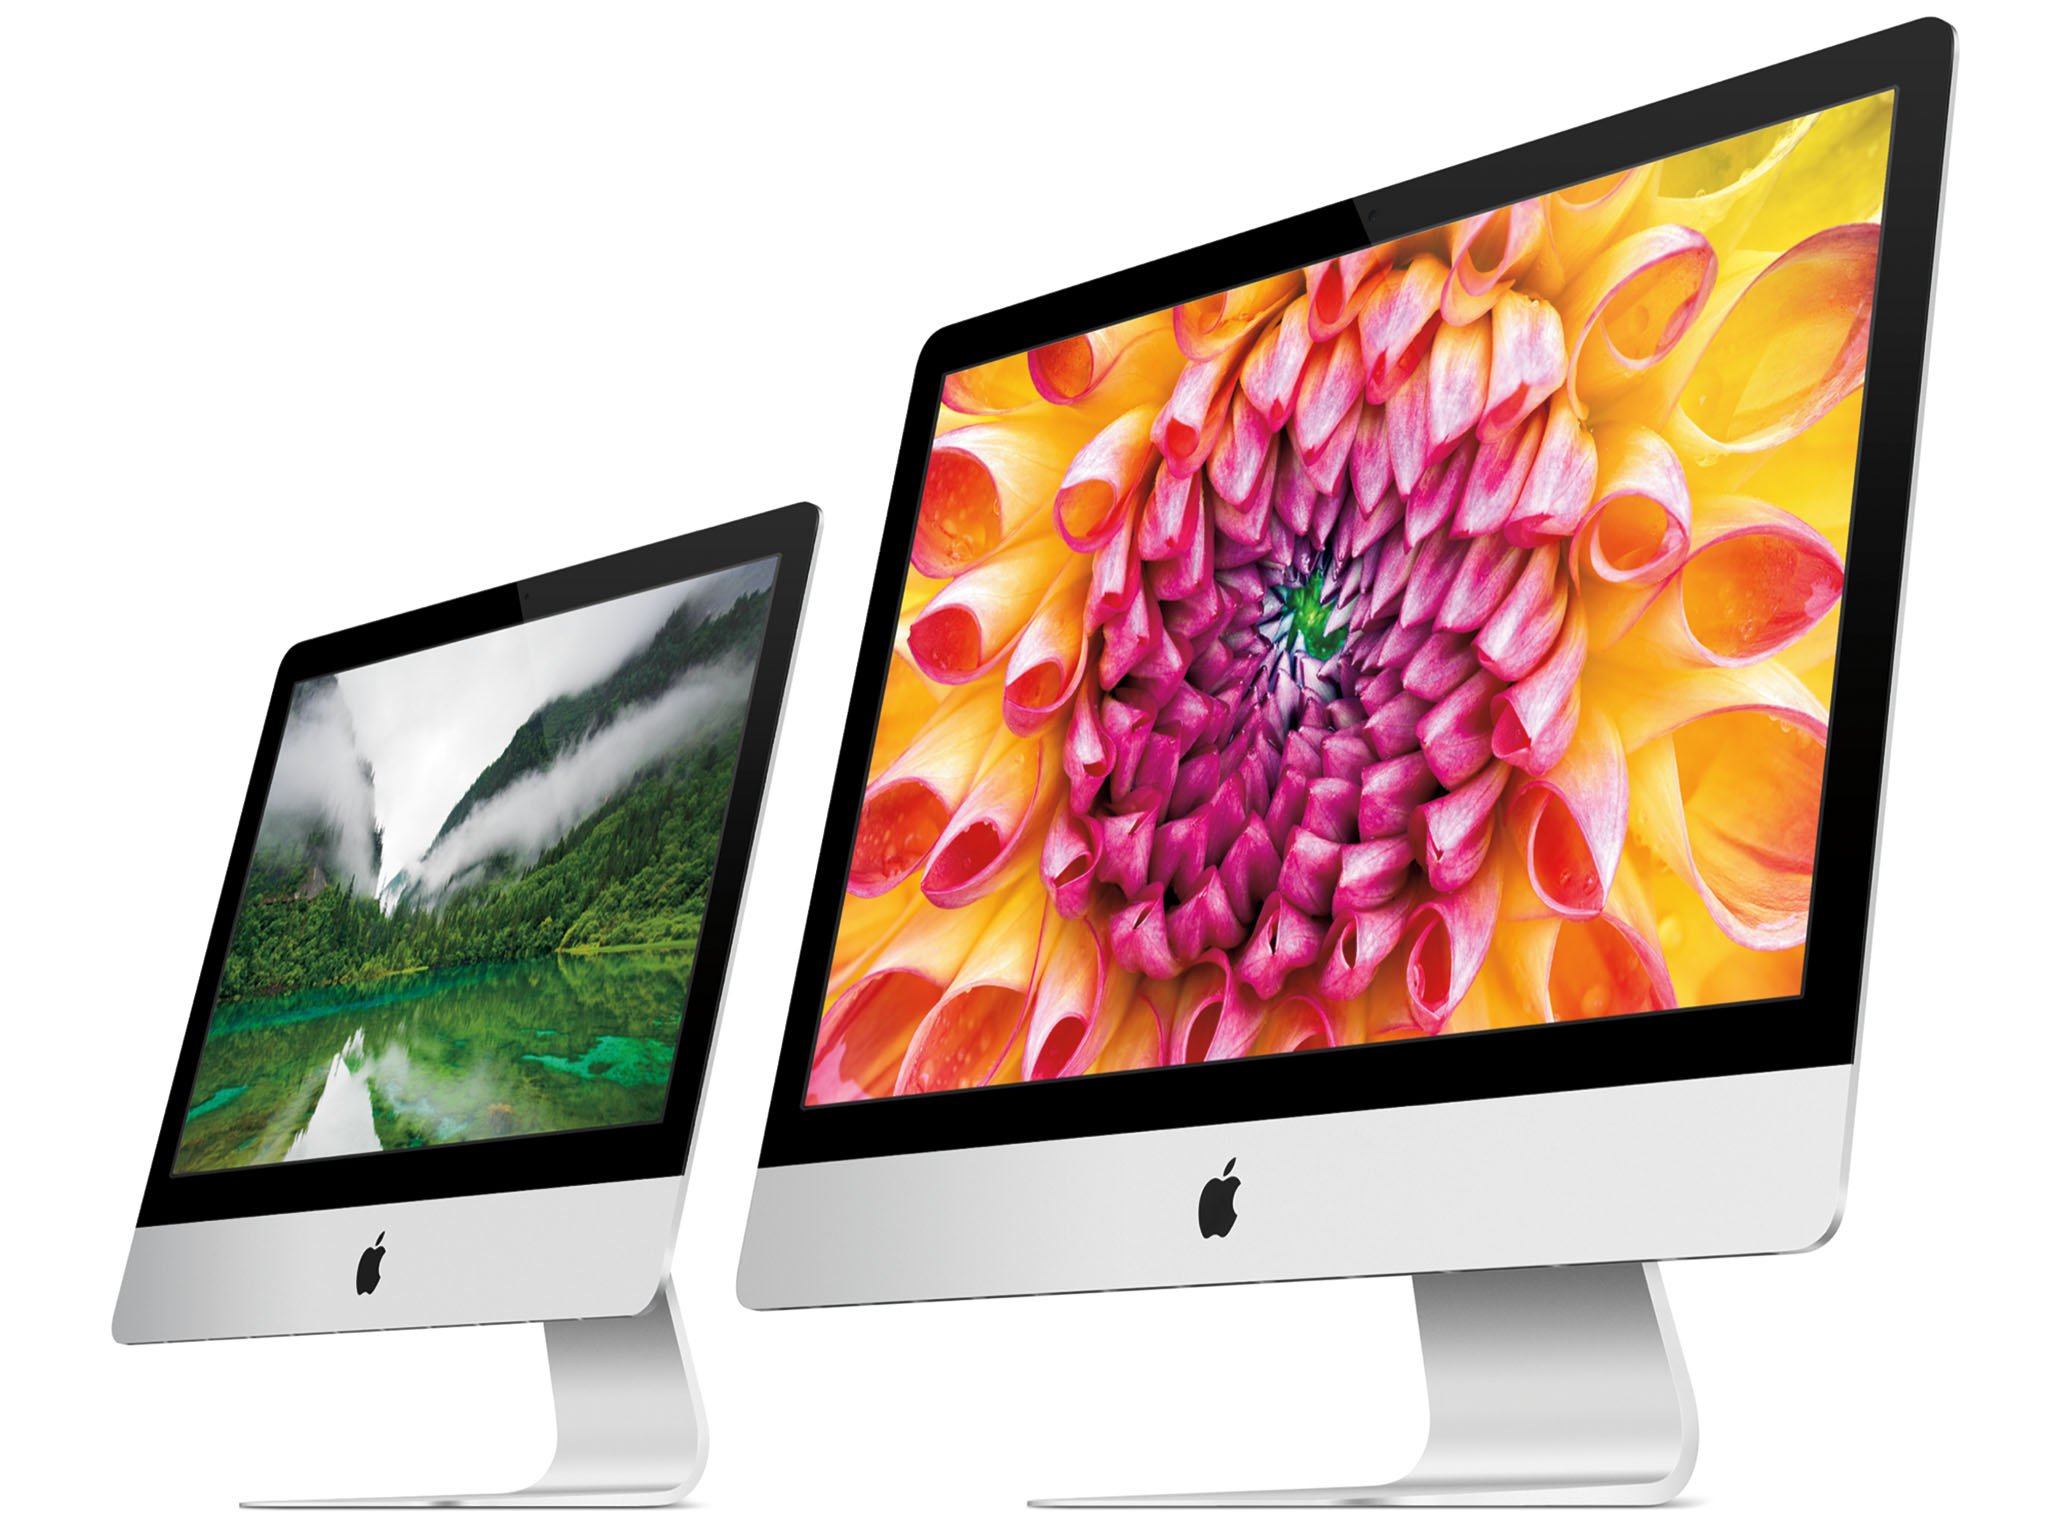 Apple updates iMac with Haswell, 802.11ac, Nvidia 700 graphics